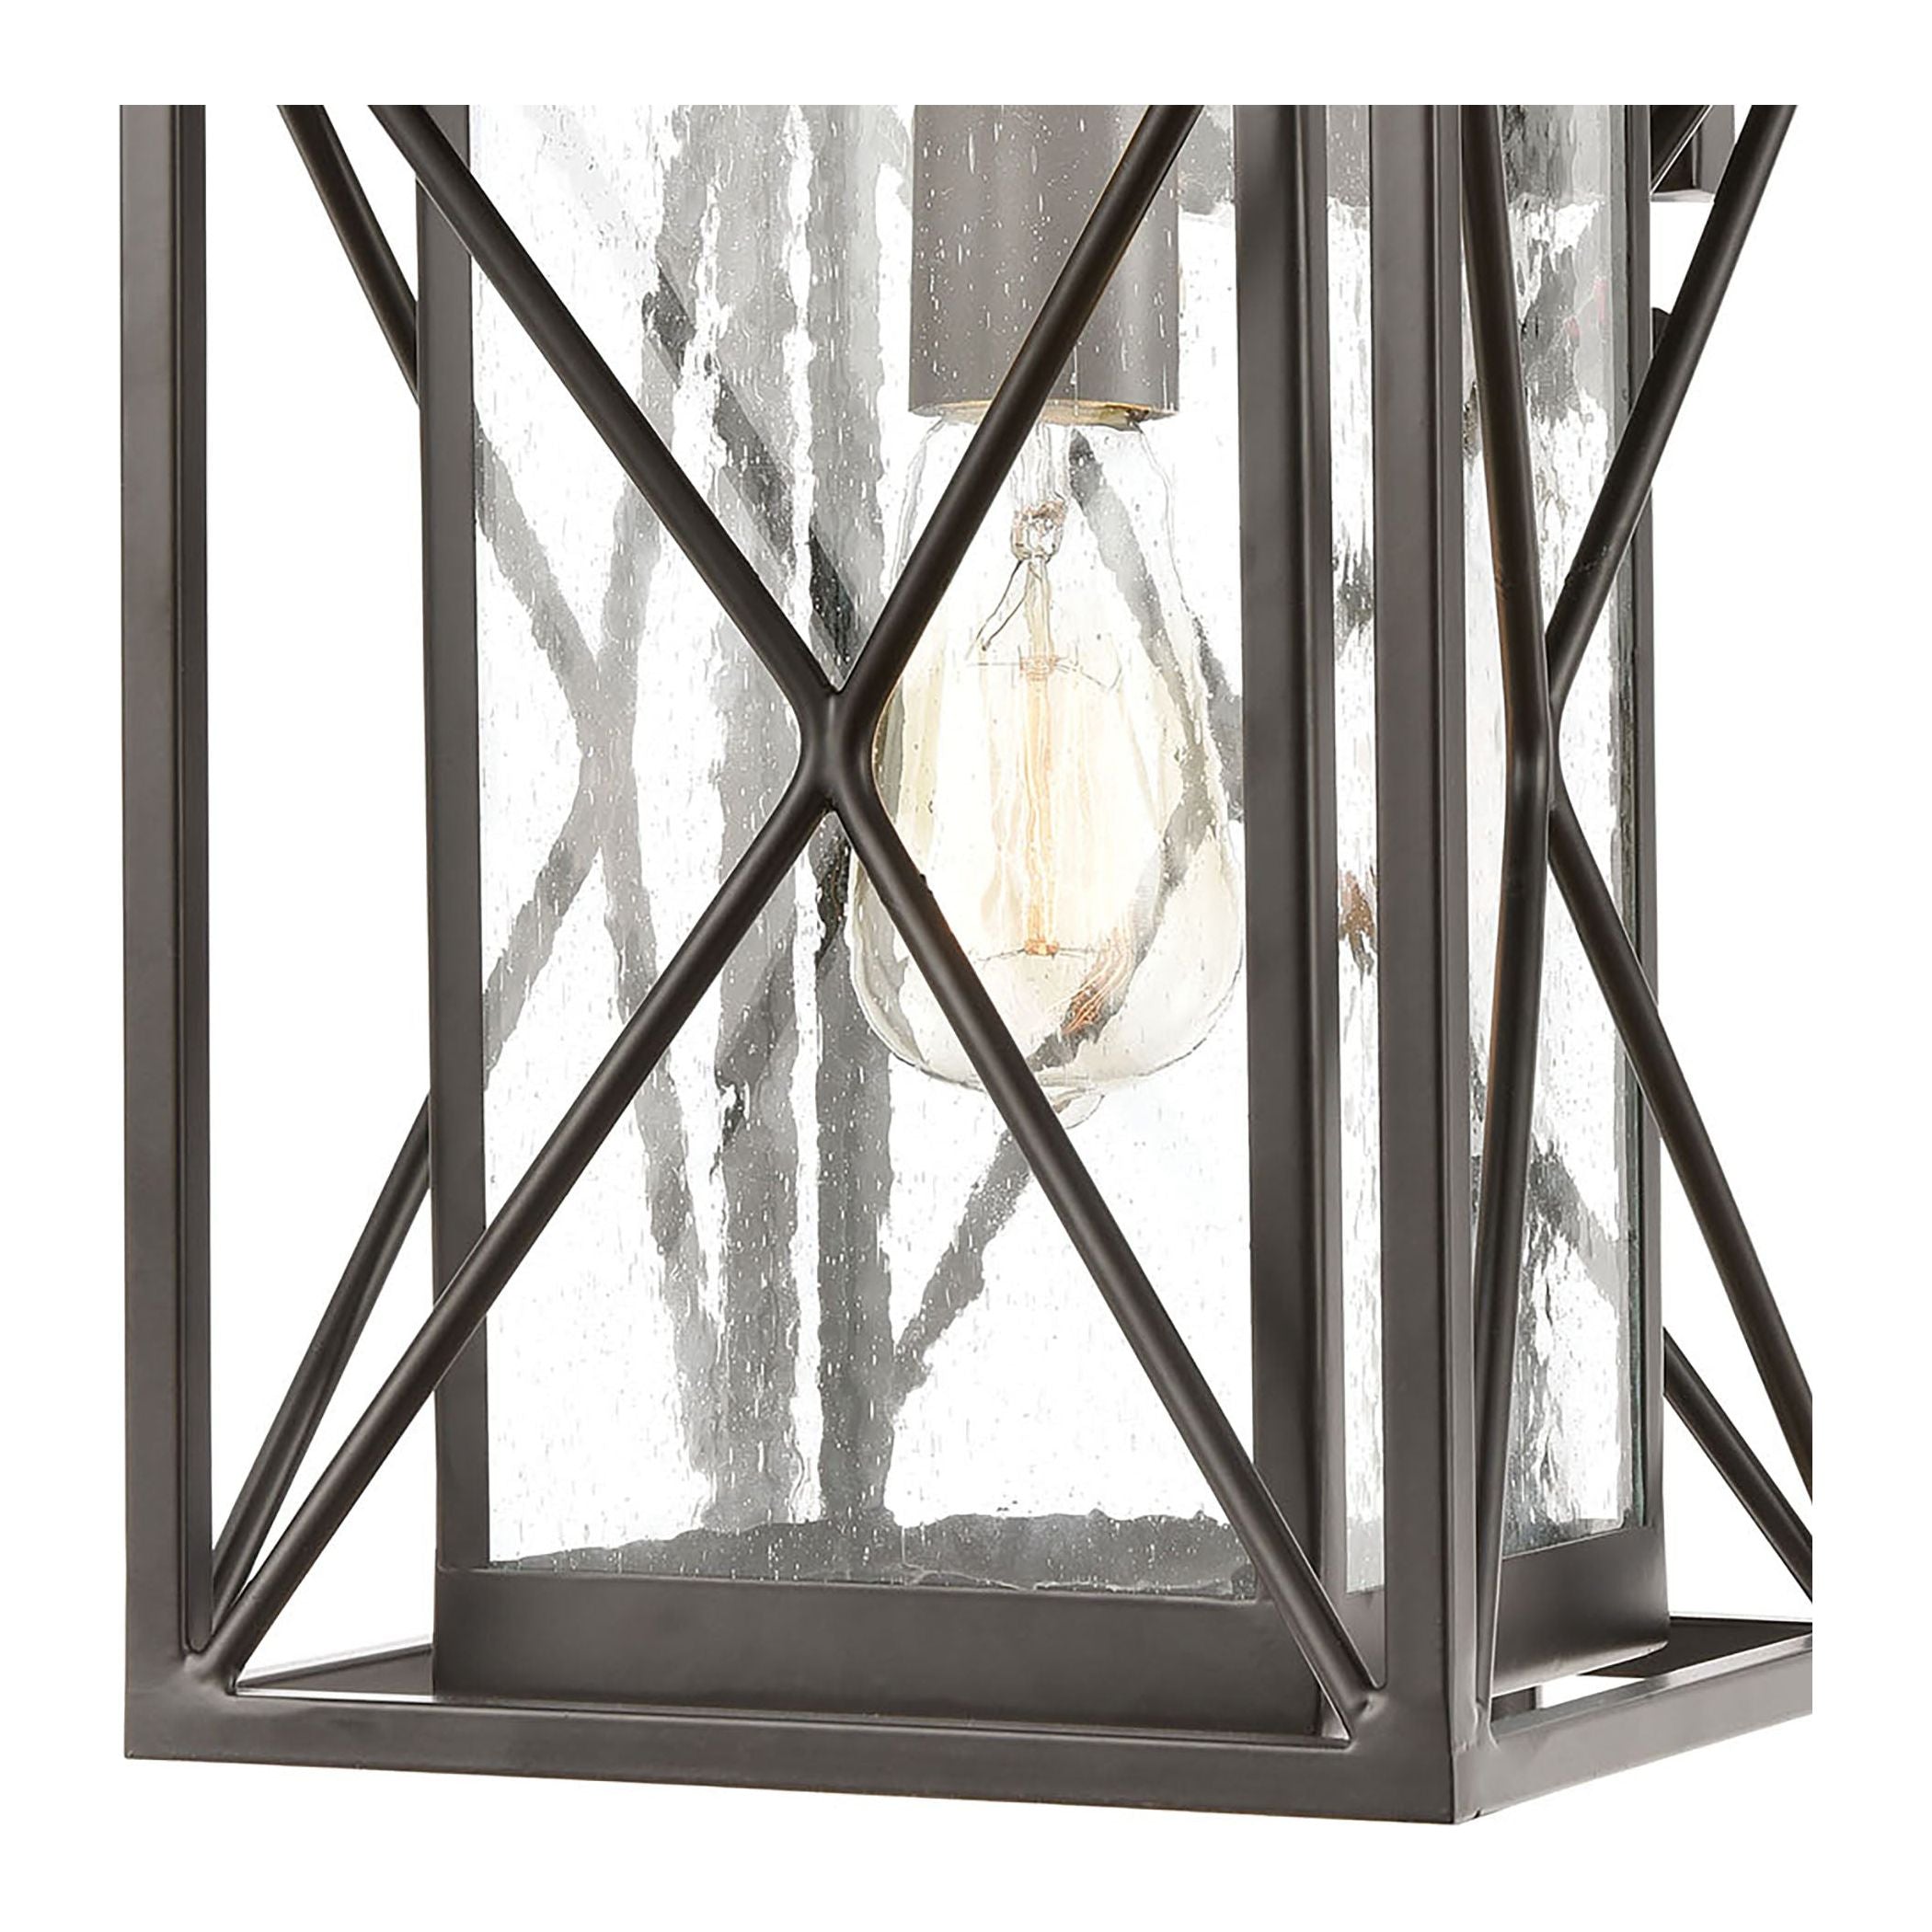 Carriage-Light 17" High 1-Light Outdoor Sconce